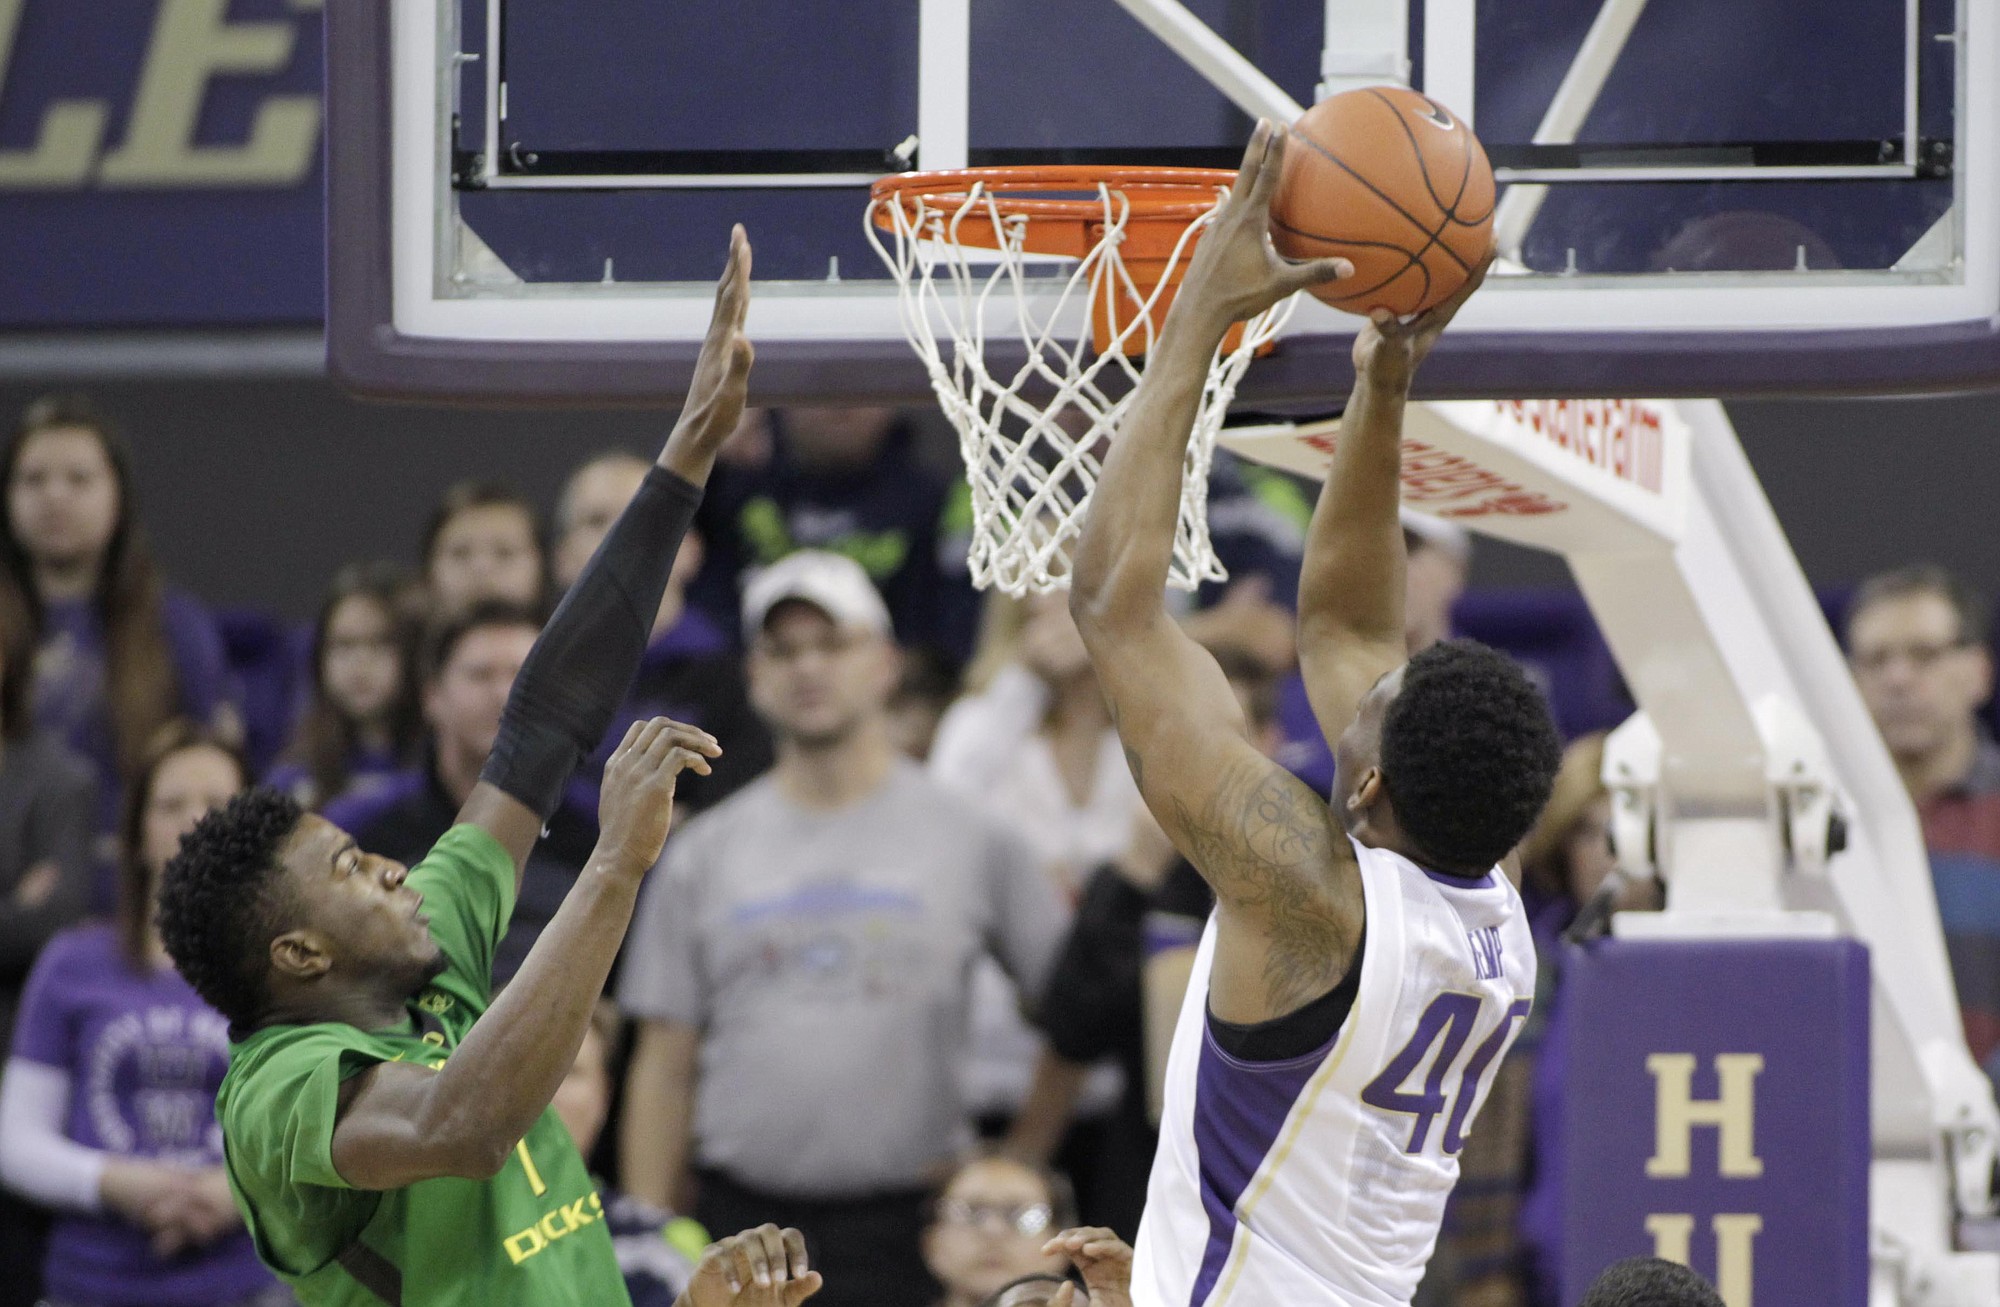 Washington's Shawn Kemp Jr. shoots with Oregon's Jordan Bell defending in the first half Sunday, Jan. 18, 2015, in Seattle.